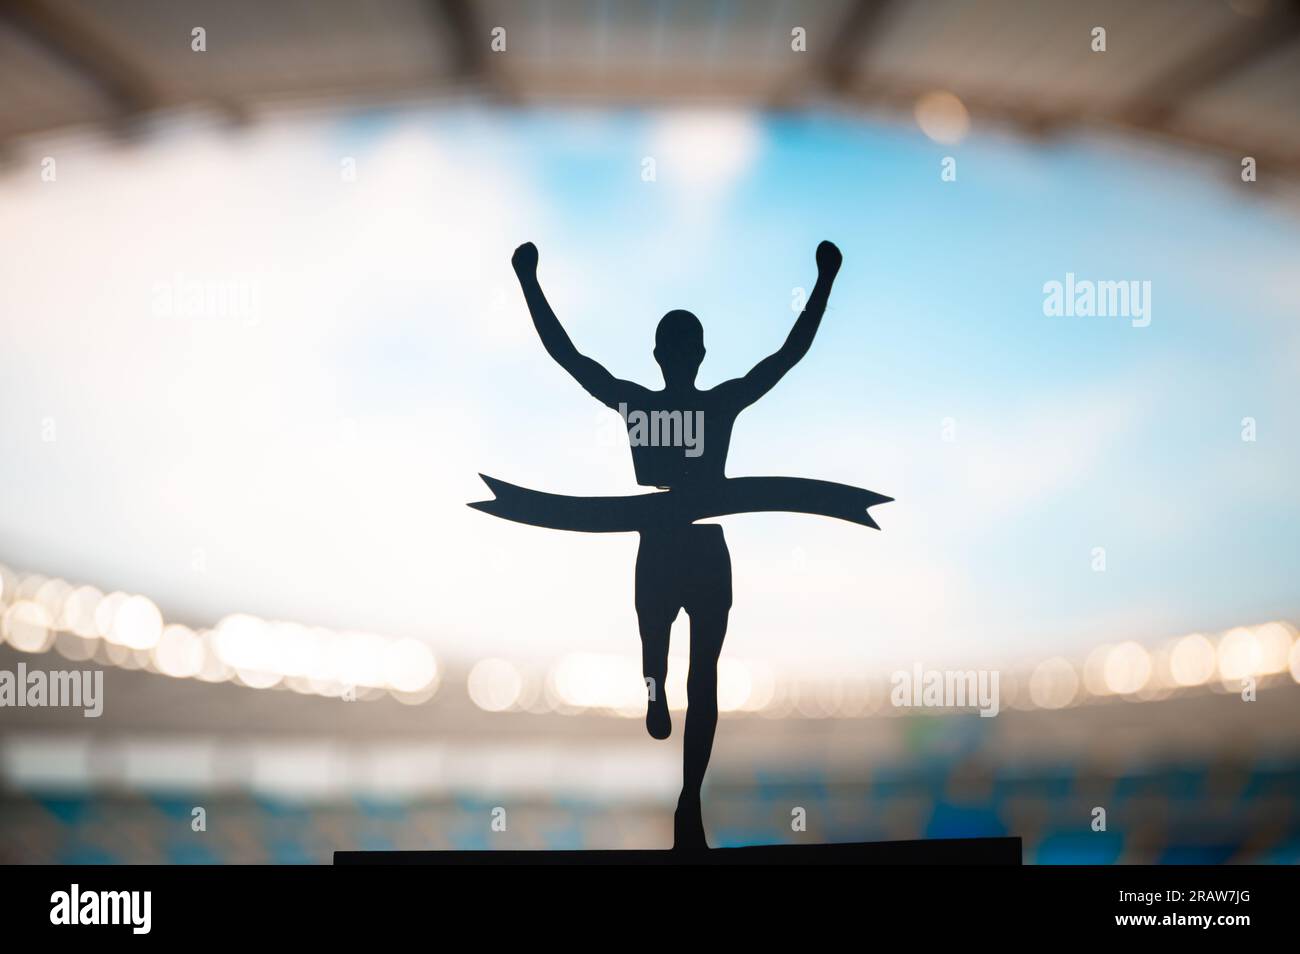 Crossing Boundaries: Runner's Silhouette Breaks the Finish Line Tape at Modern Athletics Stadium. Edit Space, Track and Field Competition Photo. Stock Photo